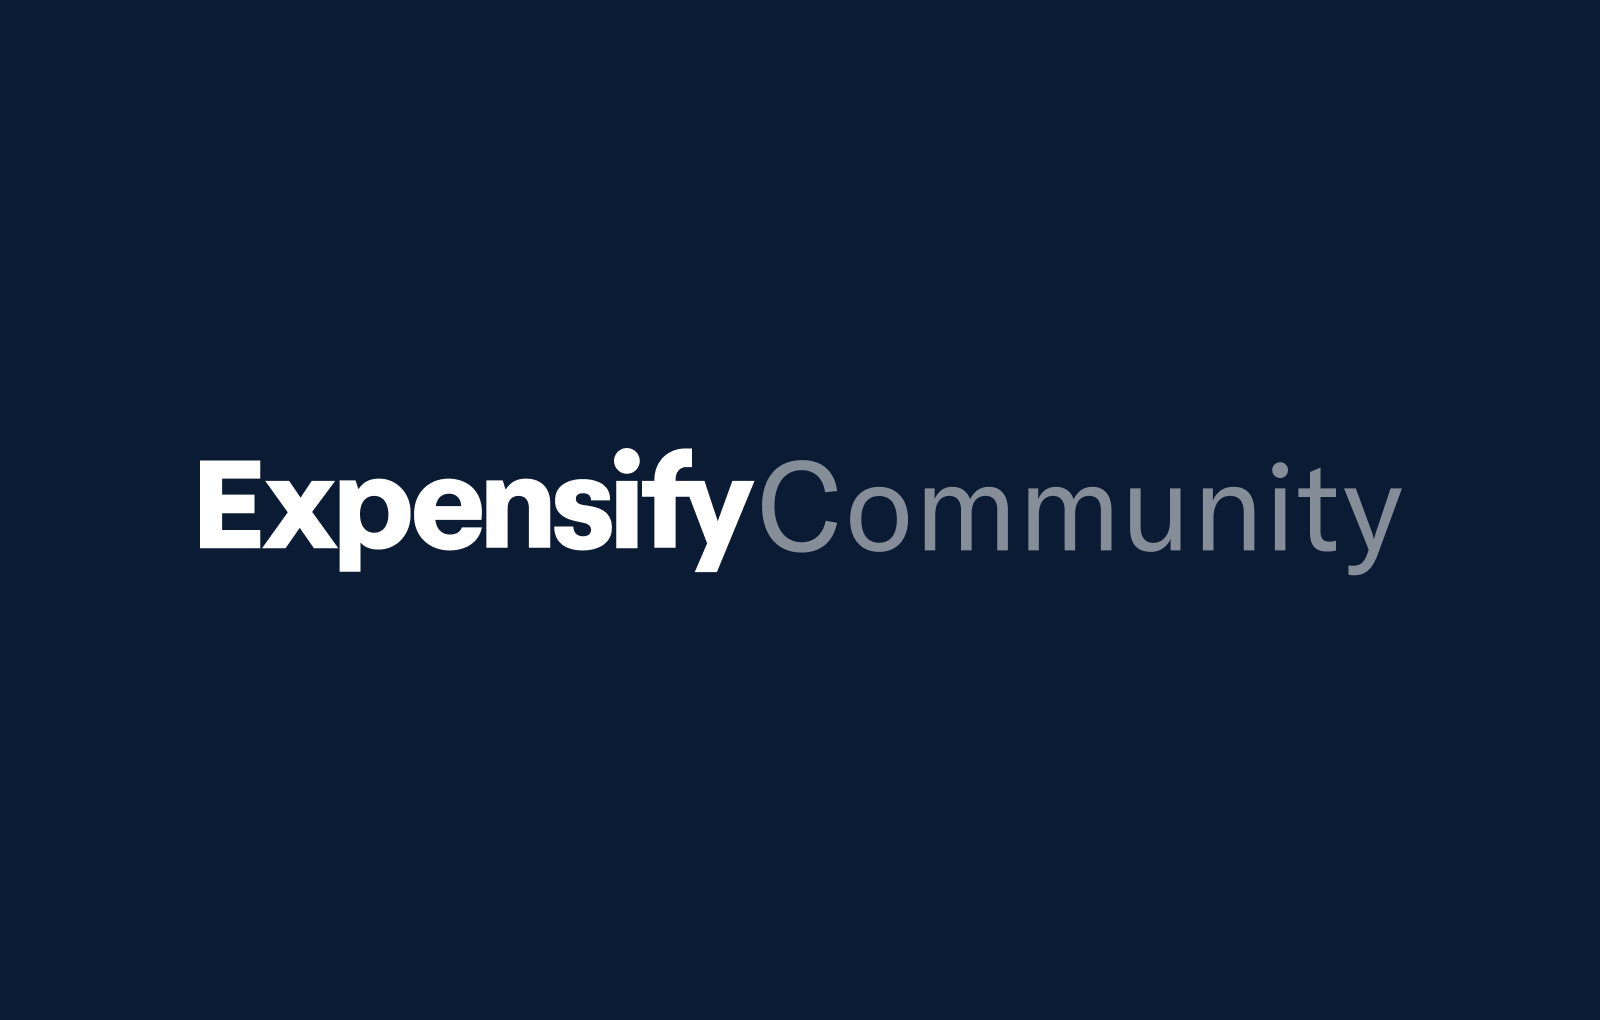 How can I Speak Real Person {1} 888 “960” 5414 “ With QB enterprise support Team If I am located out — Important Notice: After July 31, 2024, the Expensify community will not longer be available. Help docs and resources can be found on help.expensify.com and you can message Concierge with any additional questions.